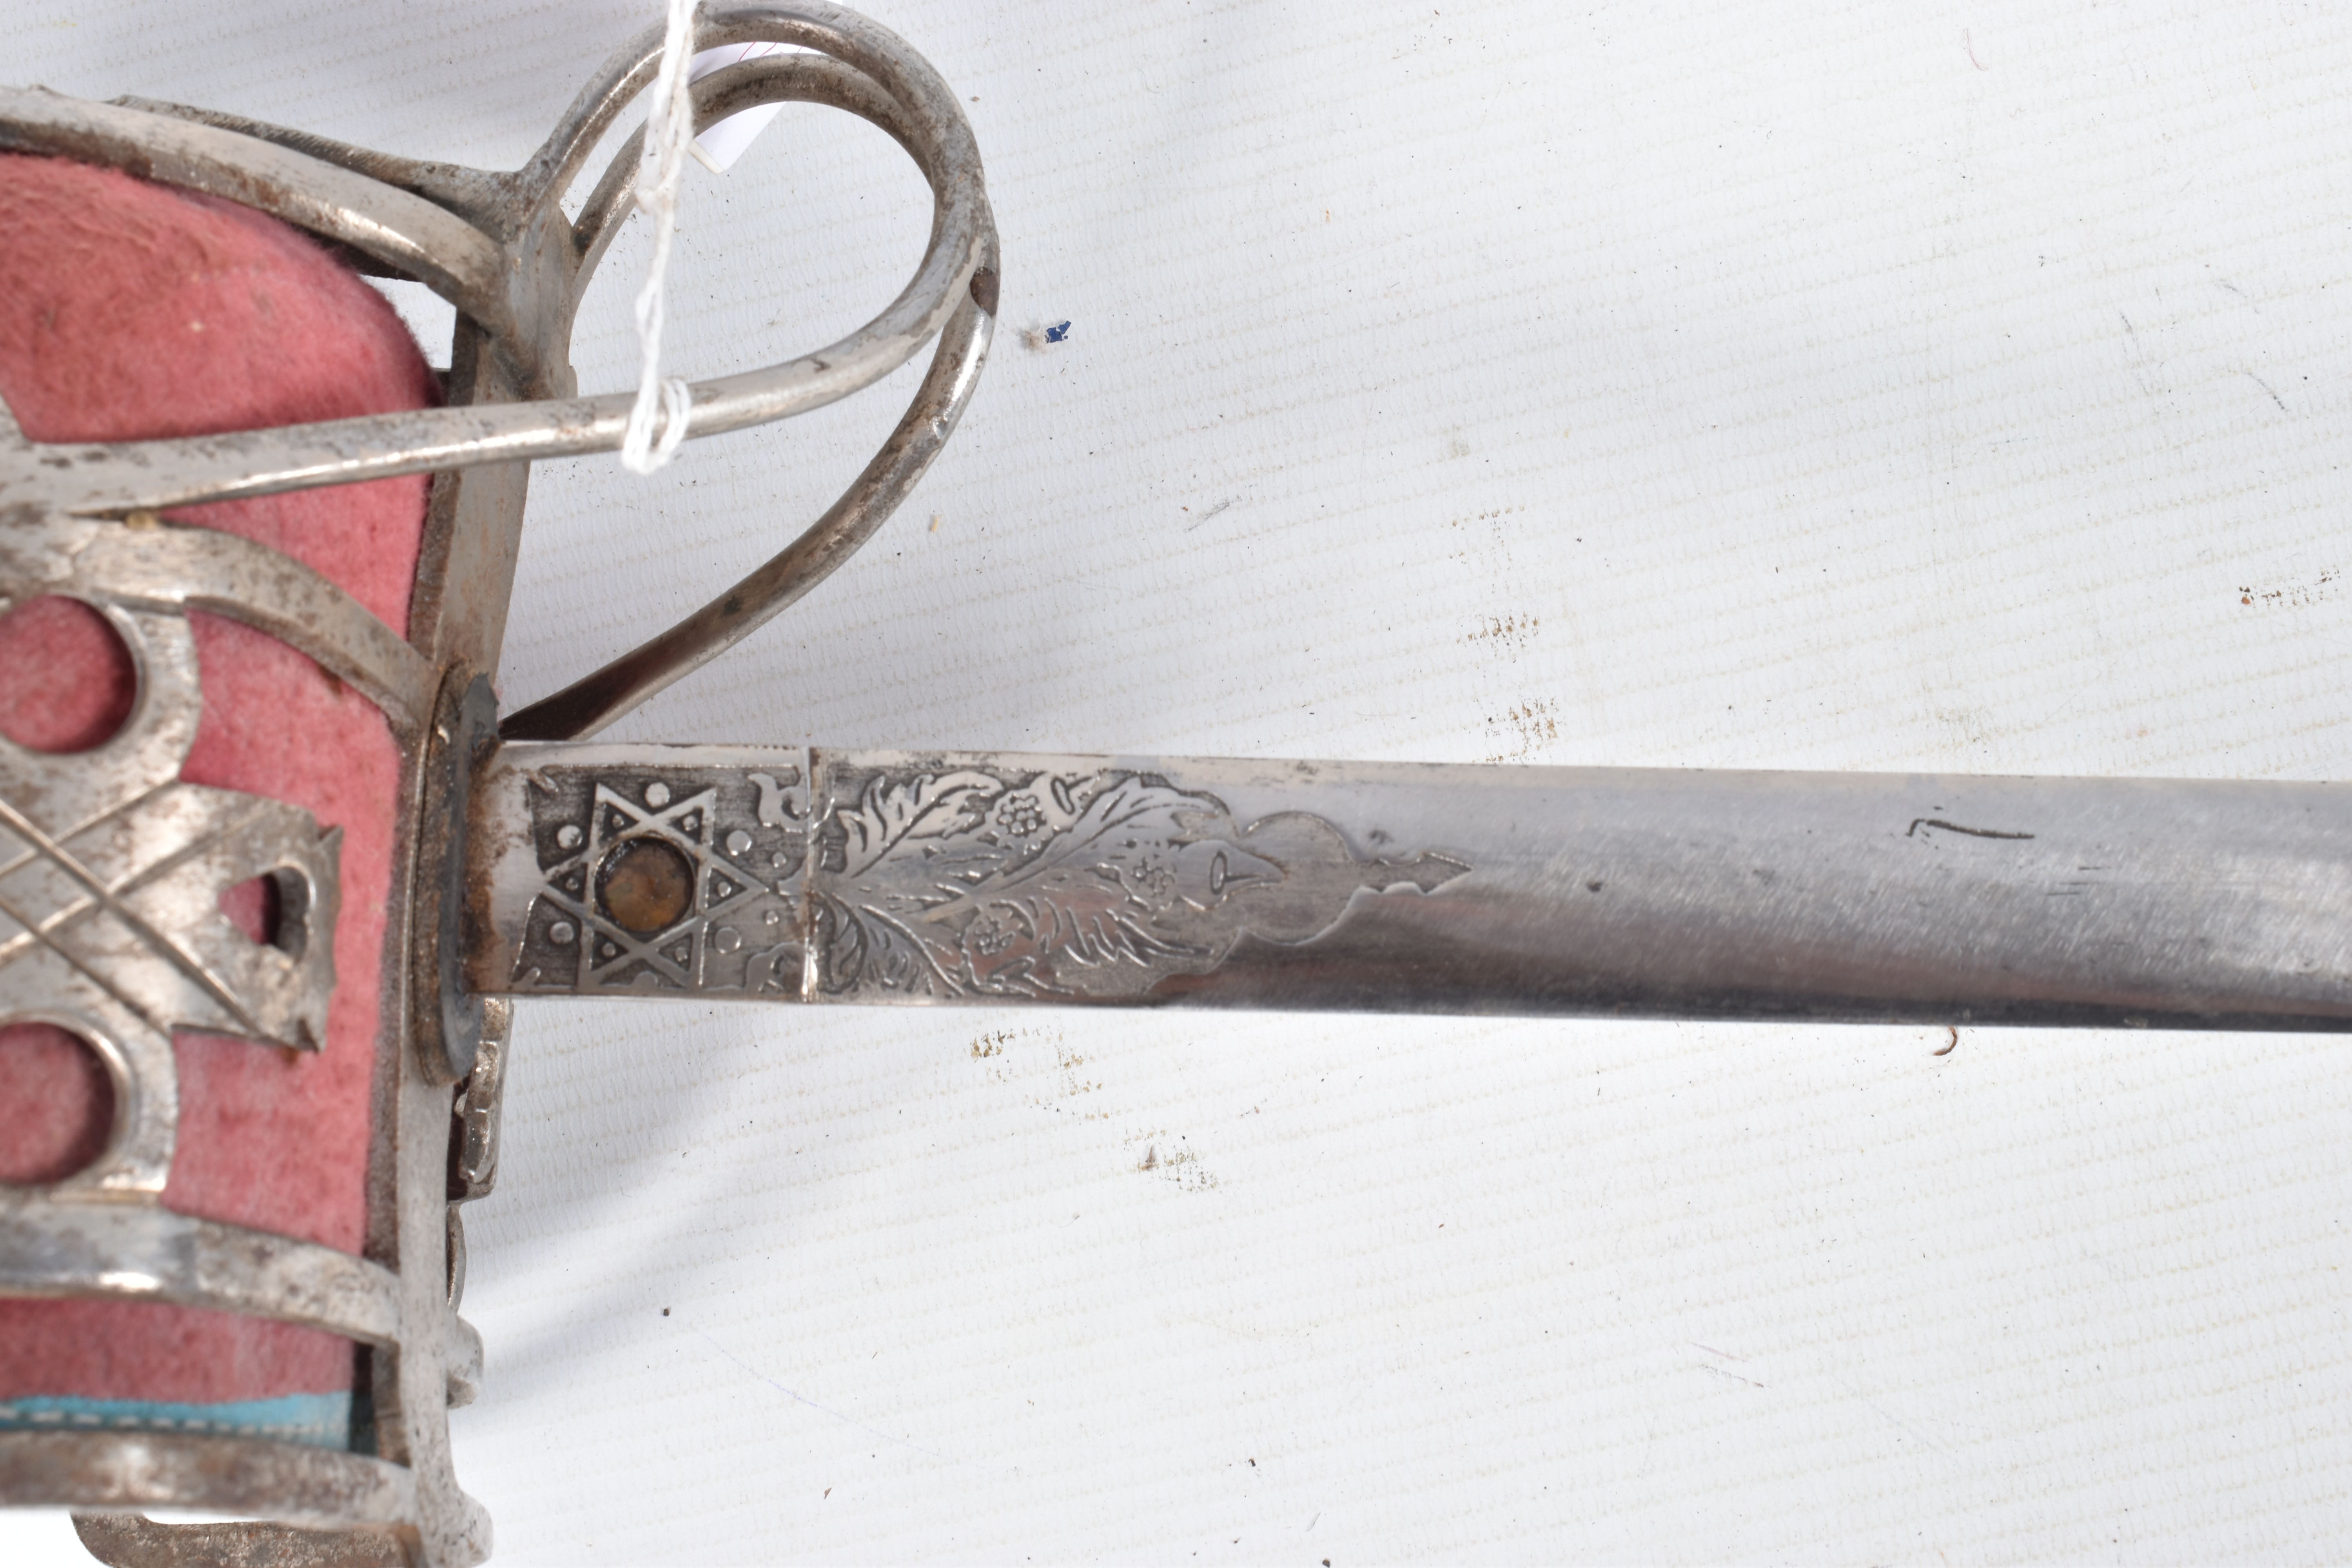 A SCOTTISH OFFICERS BASKET HILT SWORD, the blade has got ornate decoration on it but this is - Image 28 of 33